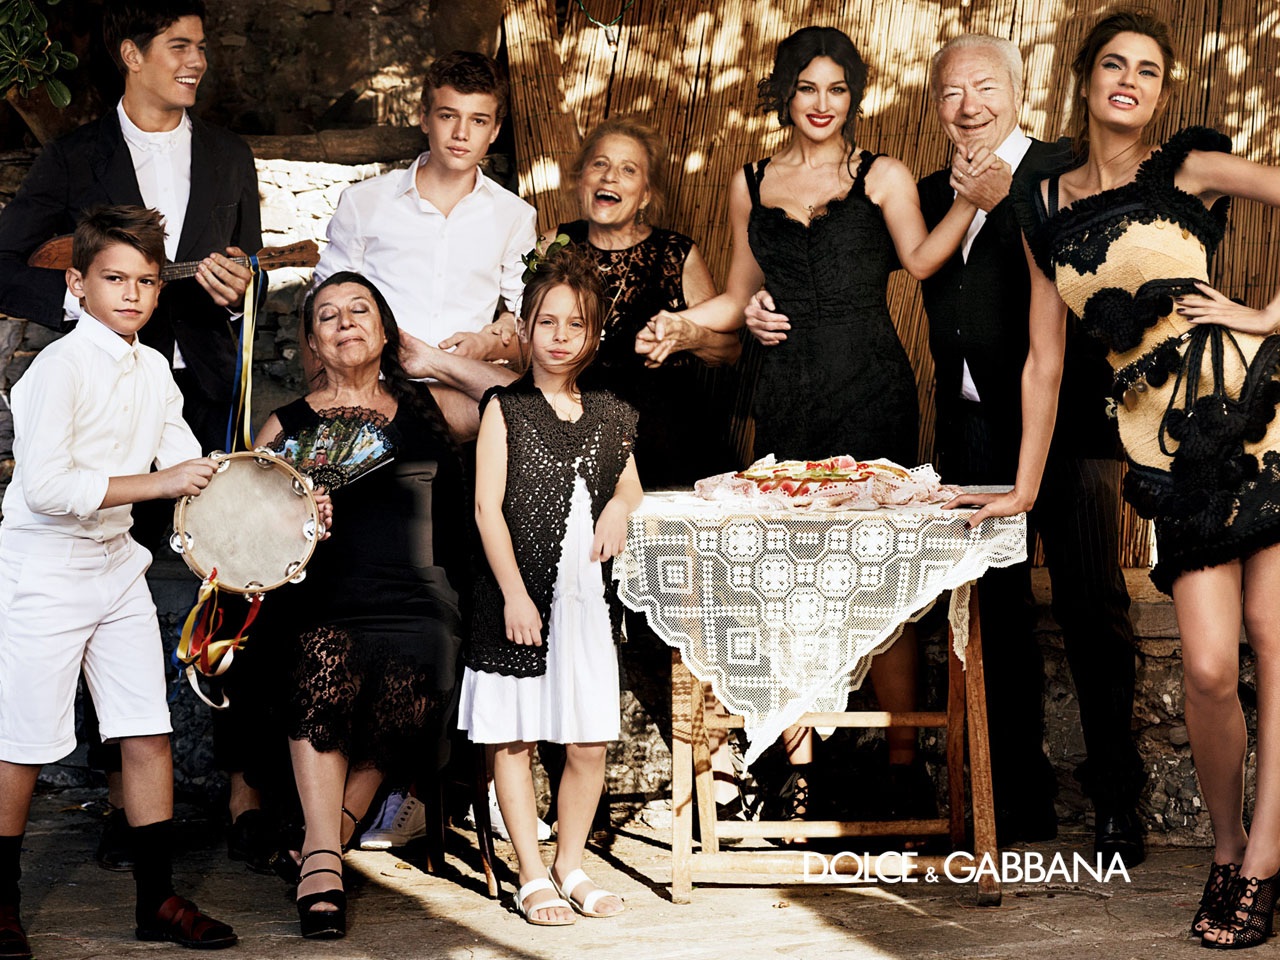 dolce and gabbana family